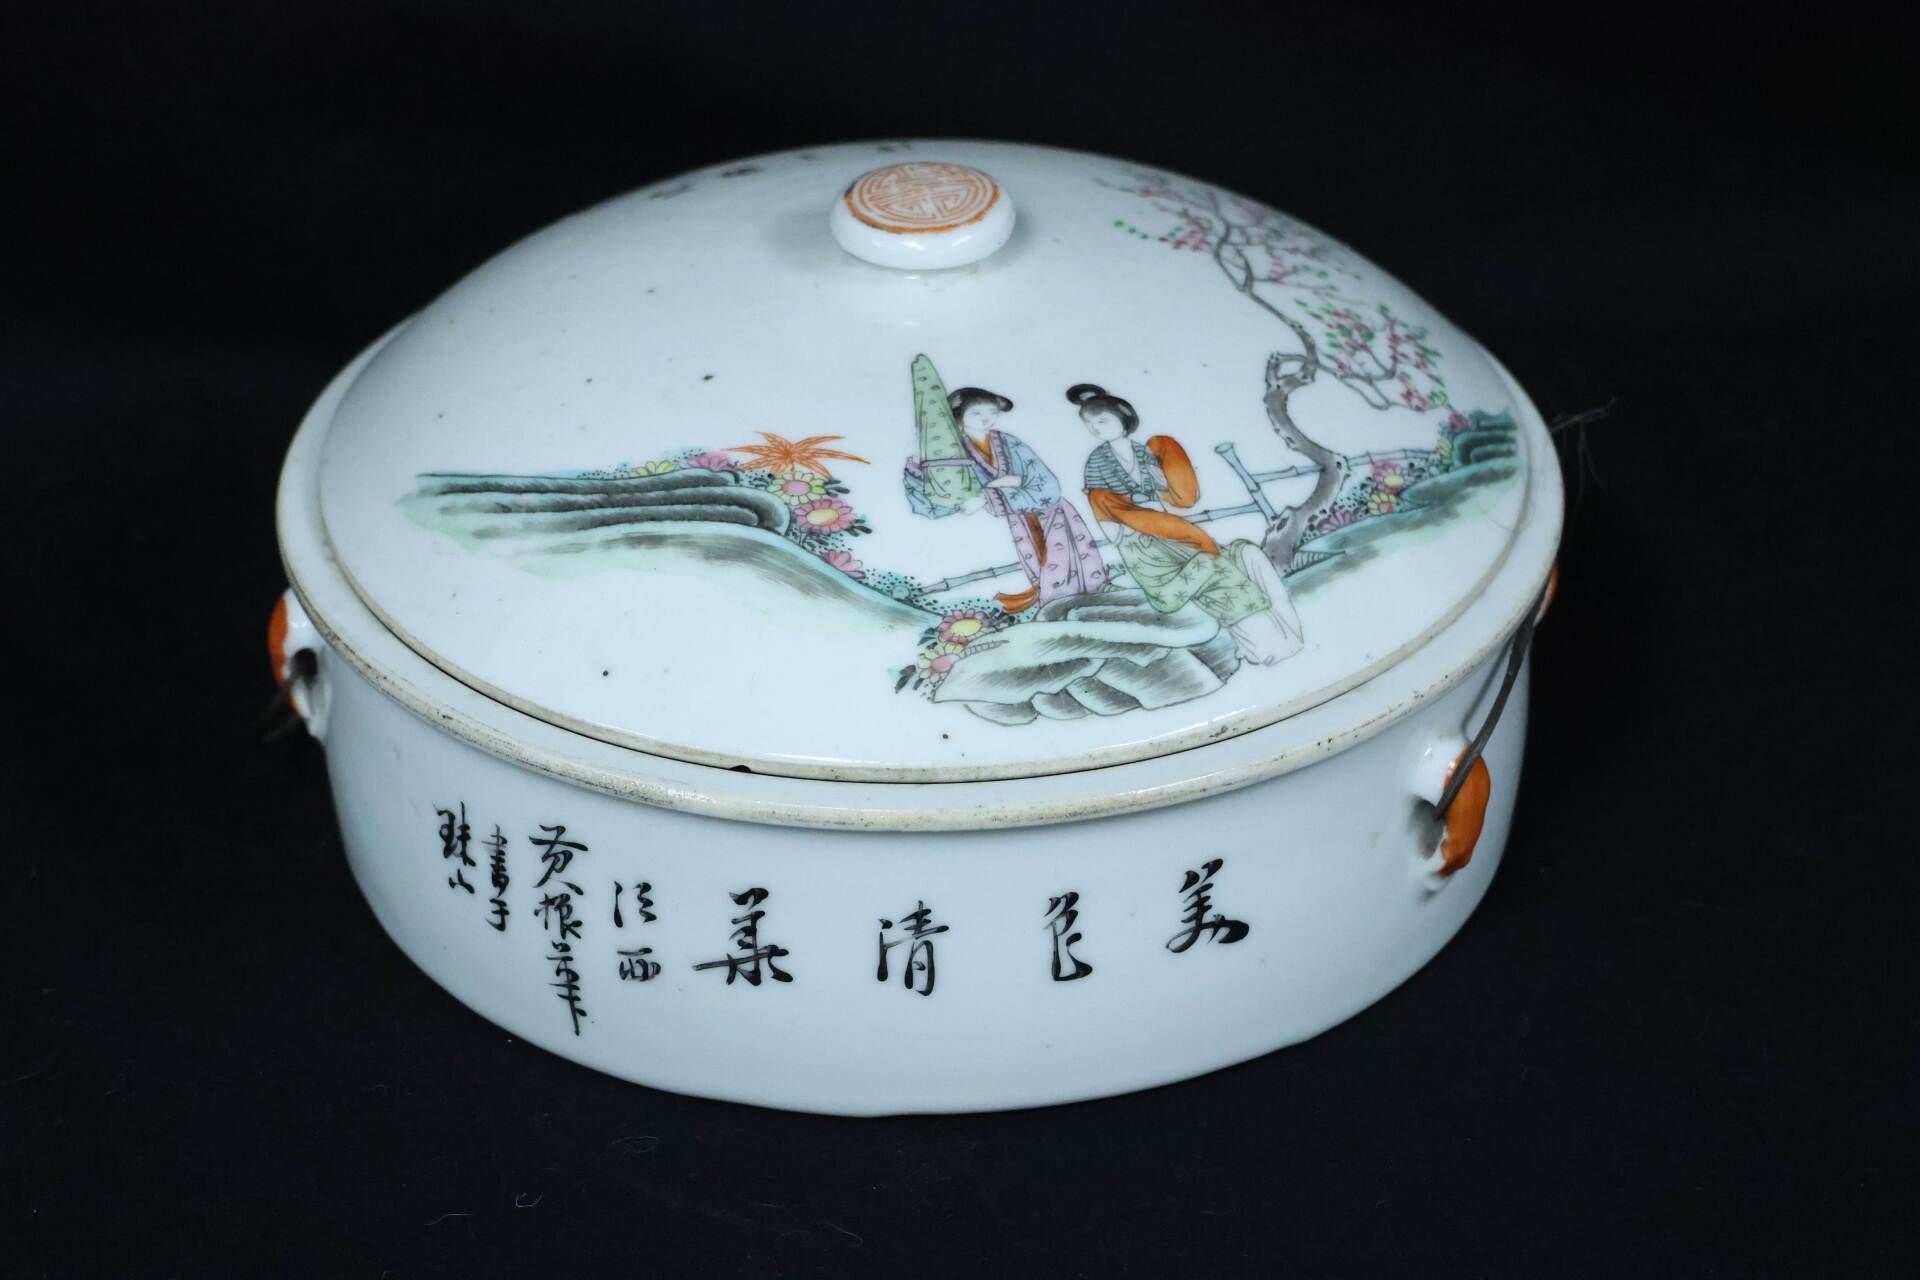 Null Soup tureen in polychrome porcelain with animated scenes in landscapes and &hellip;